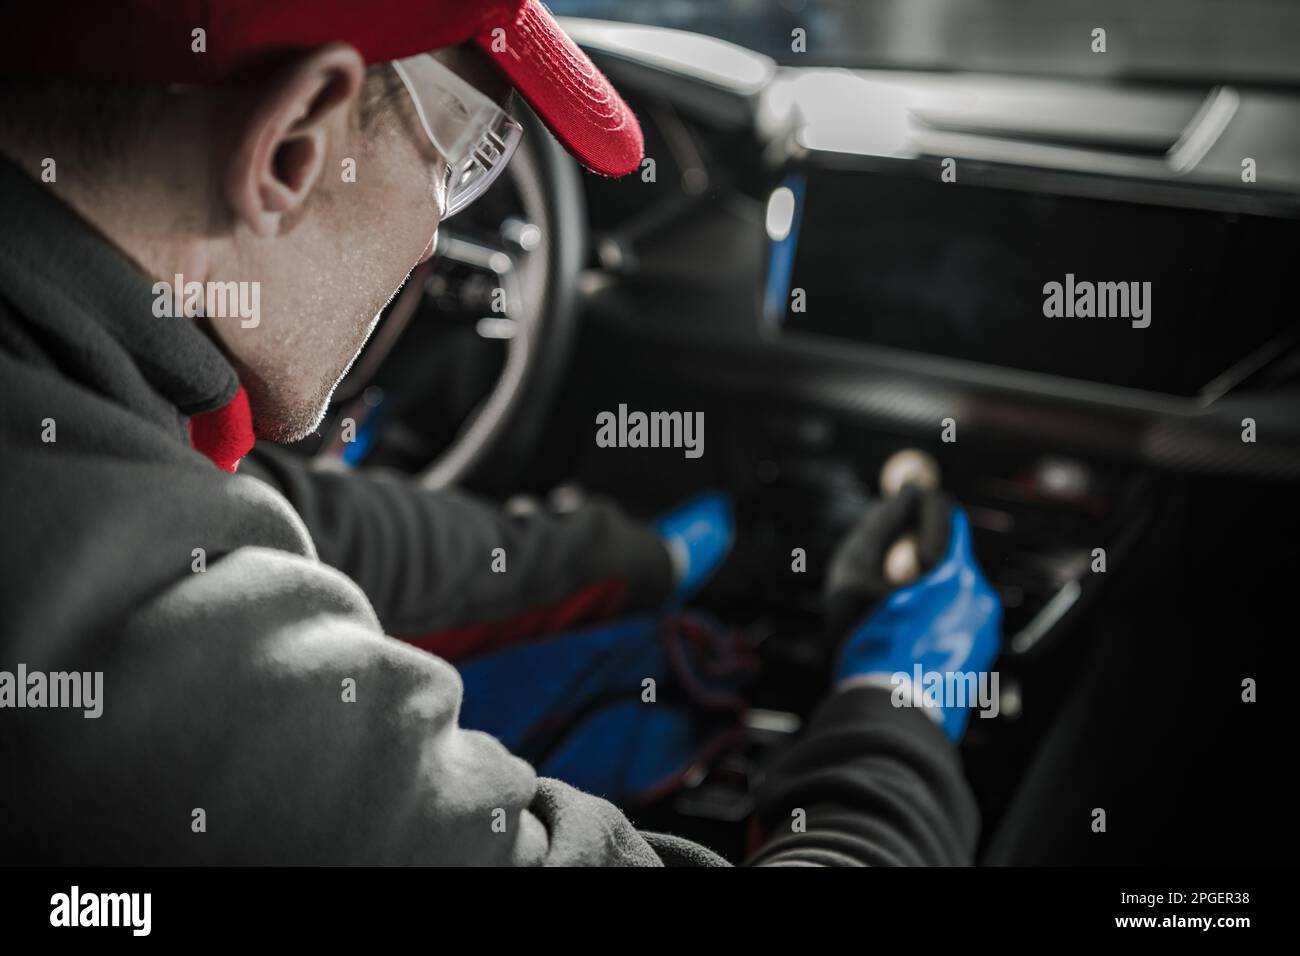 Caucasian Car Detailer Cleaning Modern Vehicle Dashboard. Automotive Industry Theme. Stock Photo